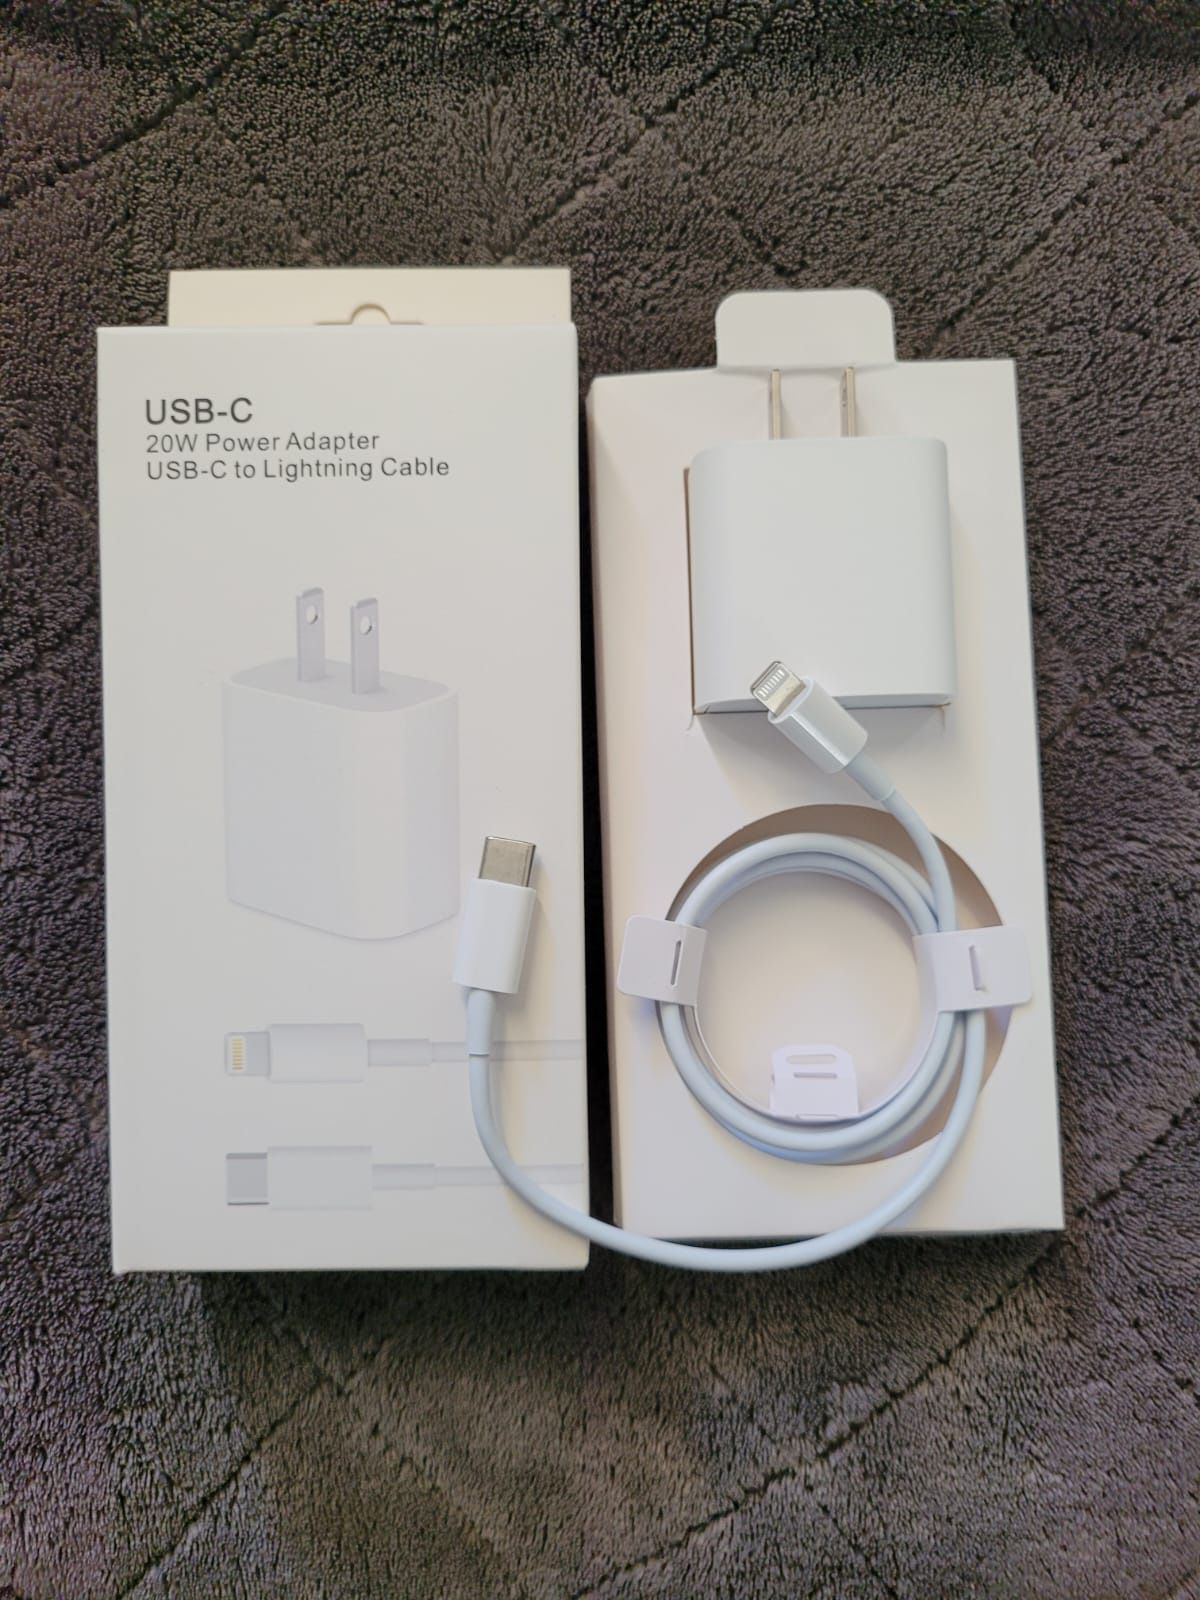 iphone fast charger w 6 feet canle also for have iphone 15 sets same price 